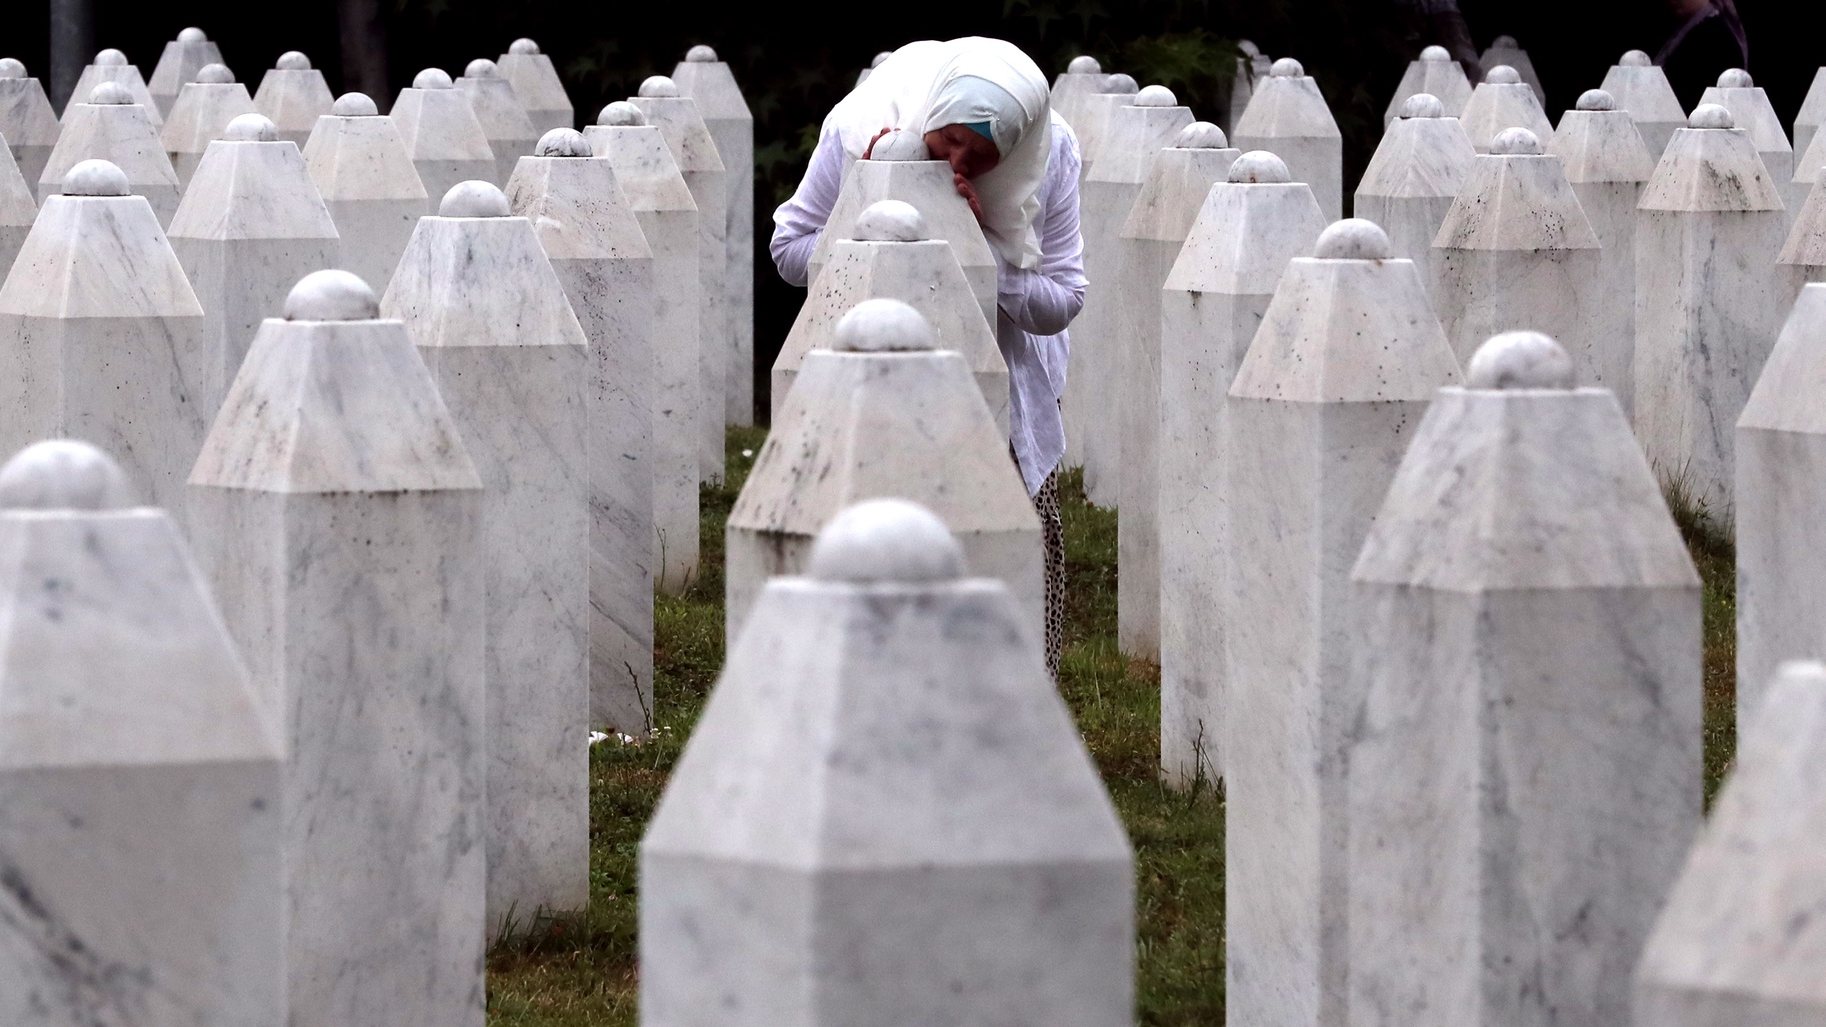 epaselect epa09336592 A Bosnian Muslim woman mourns while touching a gravestone during a funeral ceremony for nineteen newly-identified Bosnian Muslim victims, at the Potocari Memorial Center and Cemetery, in Srebrenica, Bosnia and Herzegovina, 11 July 2021. The burial was part of a memorial ceremony to mark the 26th anniversary of the Srebrenica genocide, considered the worst atrocity of Bosnia&#039;s 1992-95 war. More than 8,000 Muslim men and boys were executed in the 1995 killing spree after Bosnian Serb forces overran the town.  EPA/FEHIM DEMIR